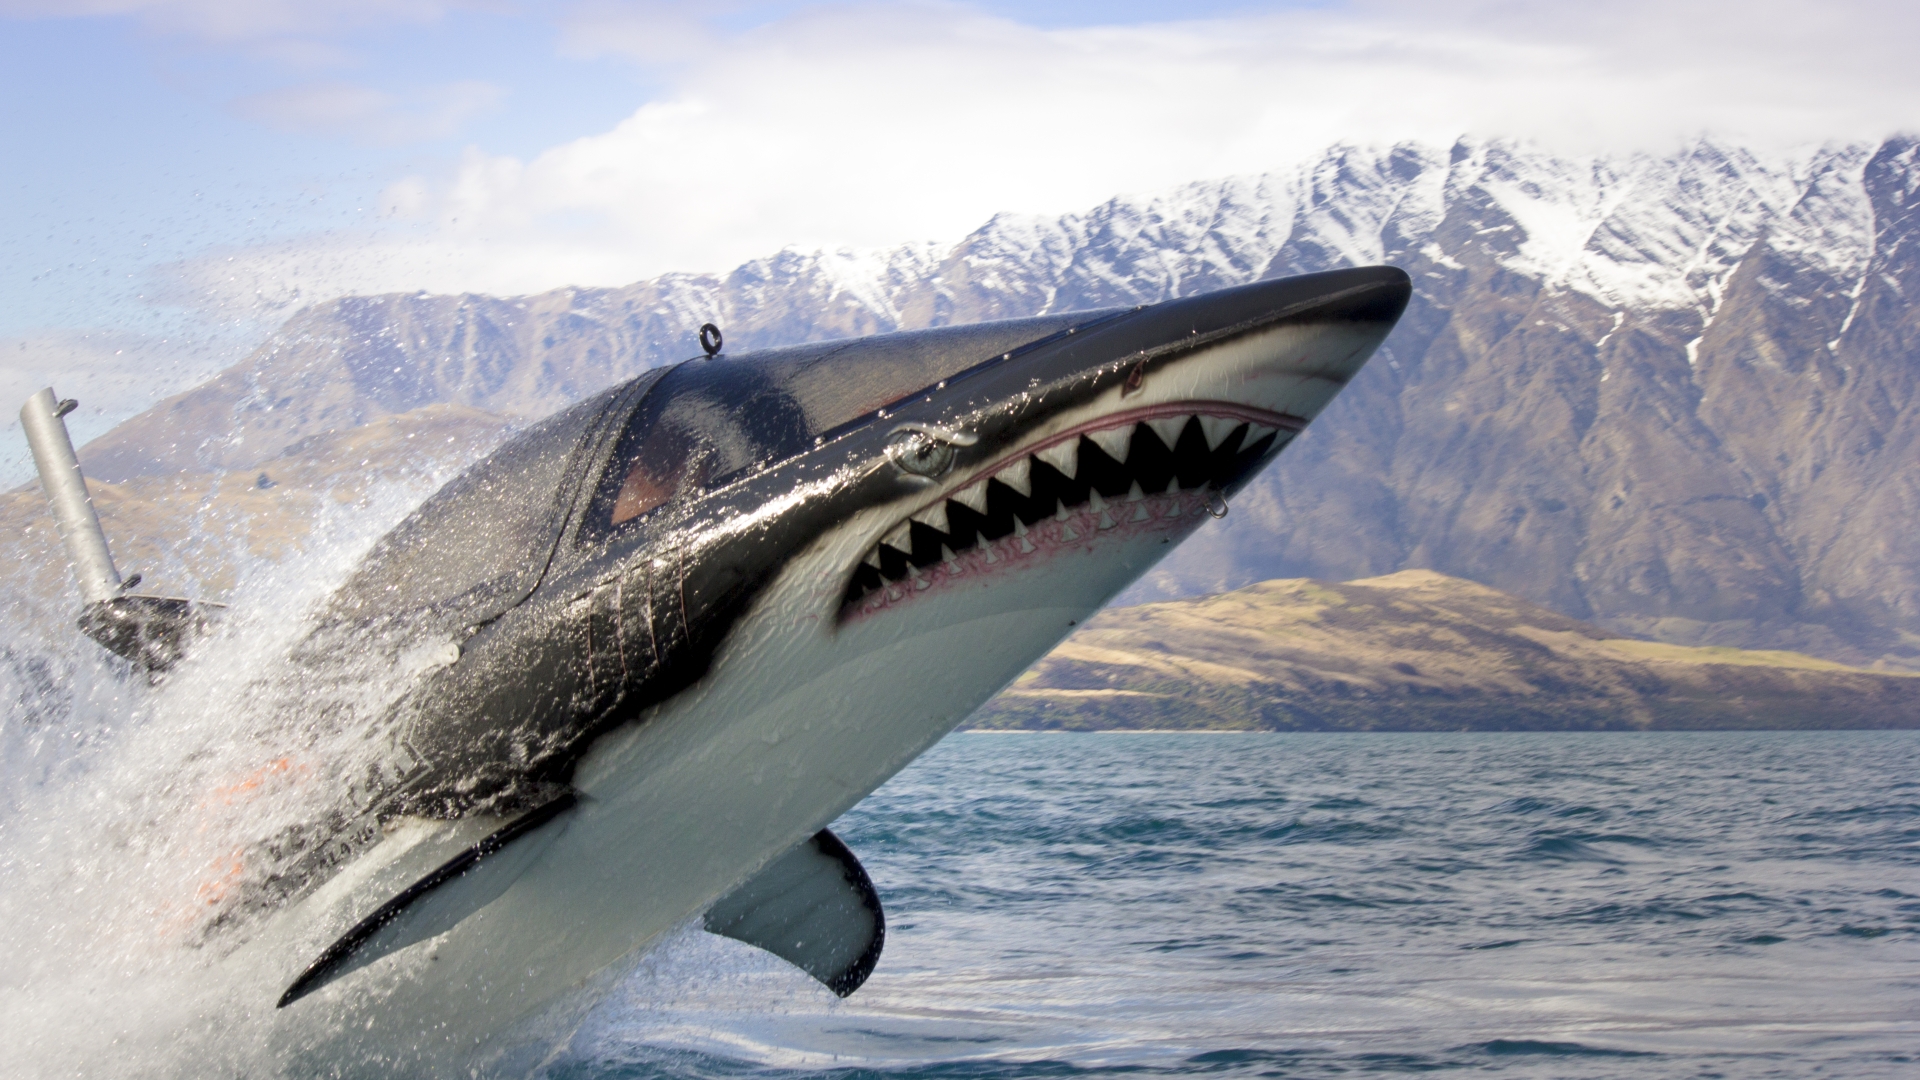 A jet boat shark can travel at 60mph, dive under water for 15 second and jump 18ft into the air.